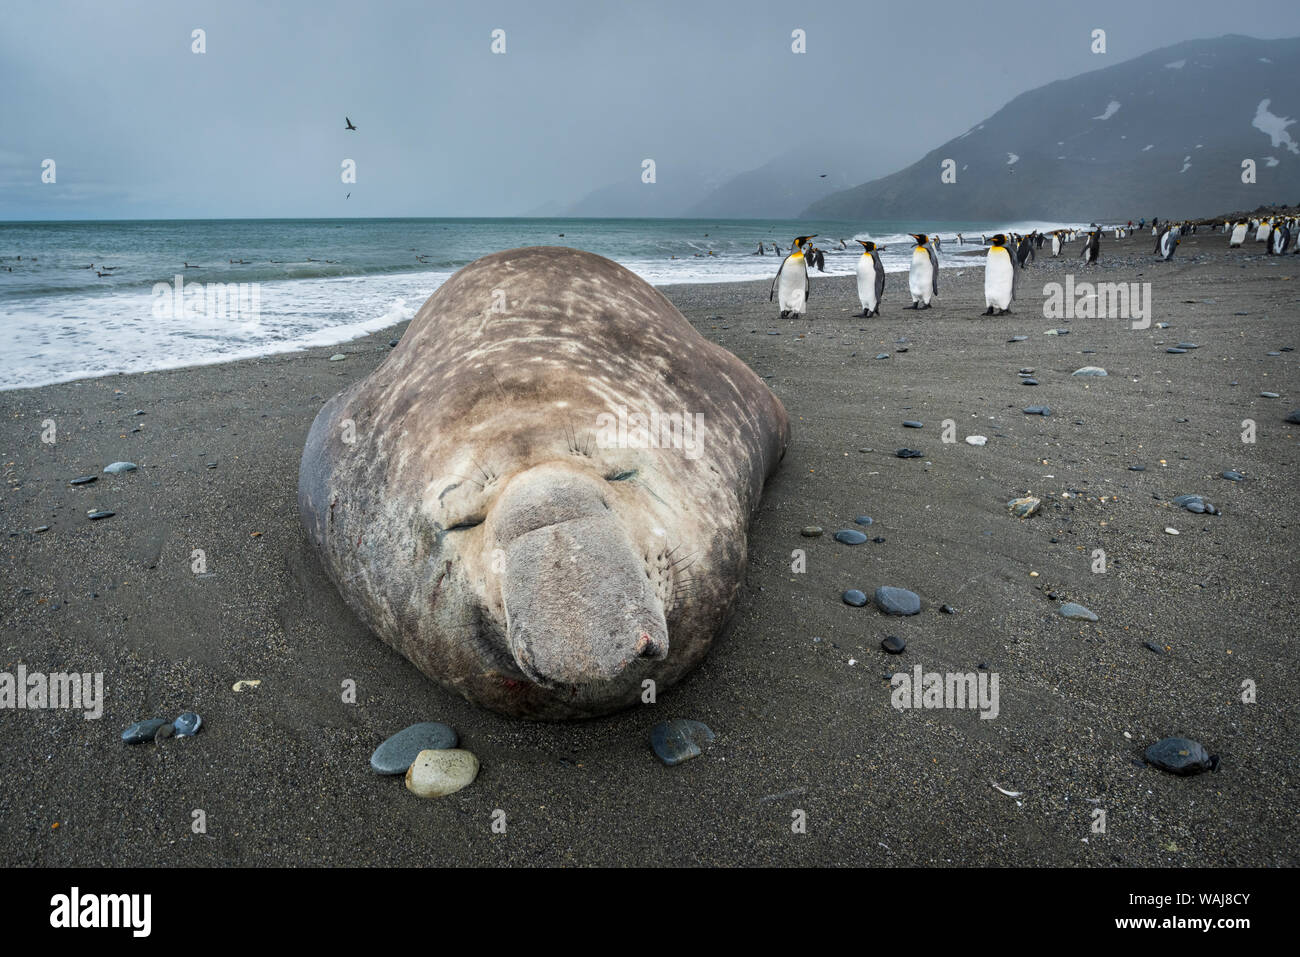 South Georgia Island, St. Andrews Bay. Southern elephant seal hauled out on beach. Stock Photo